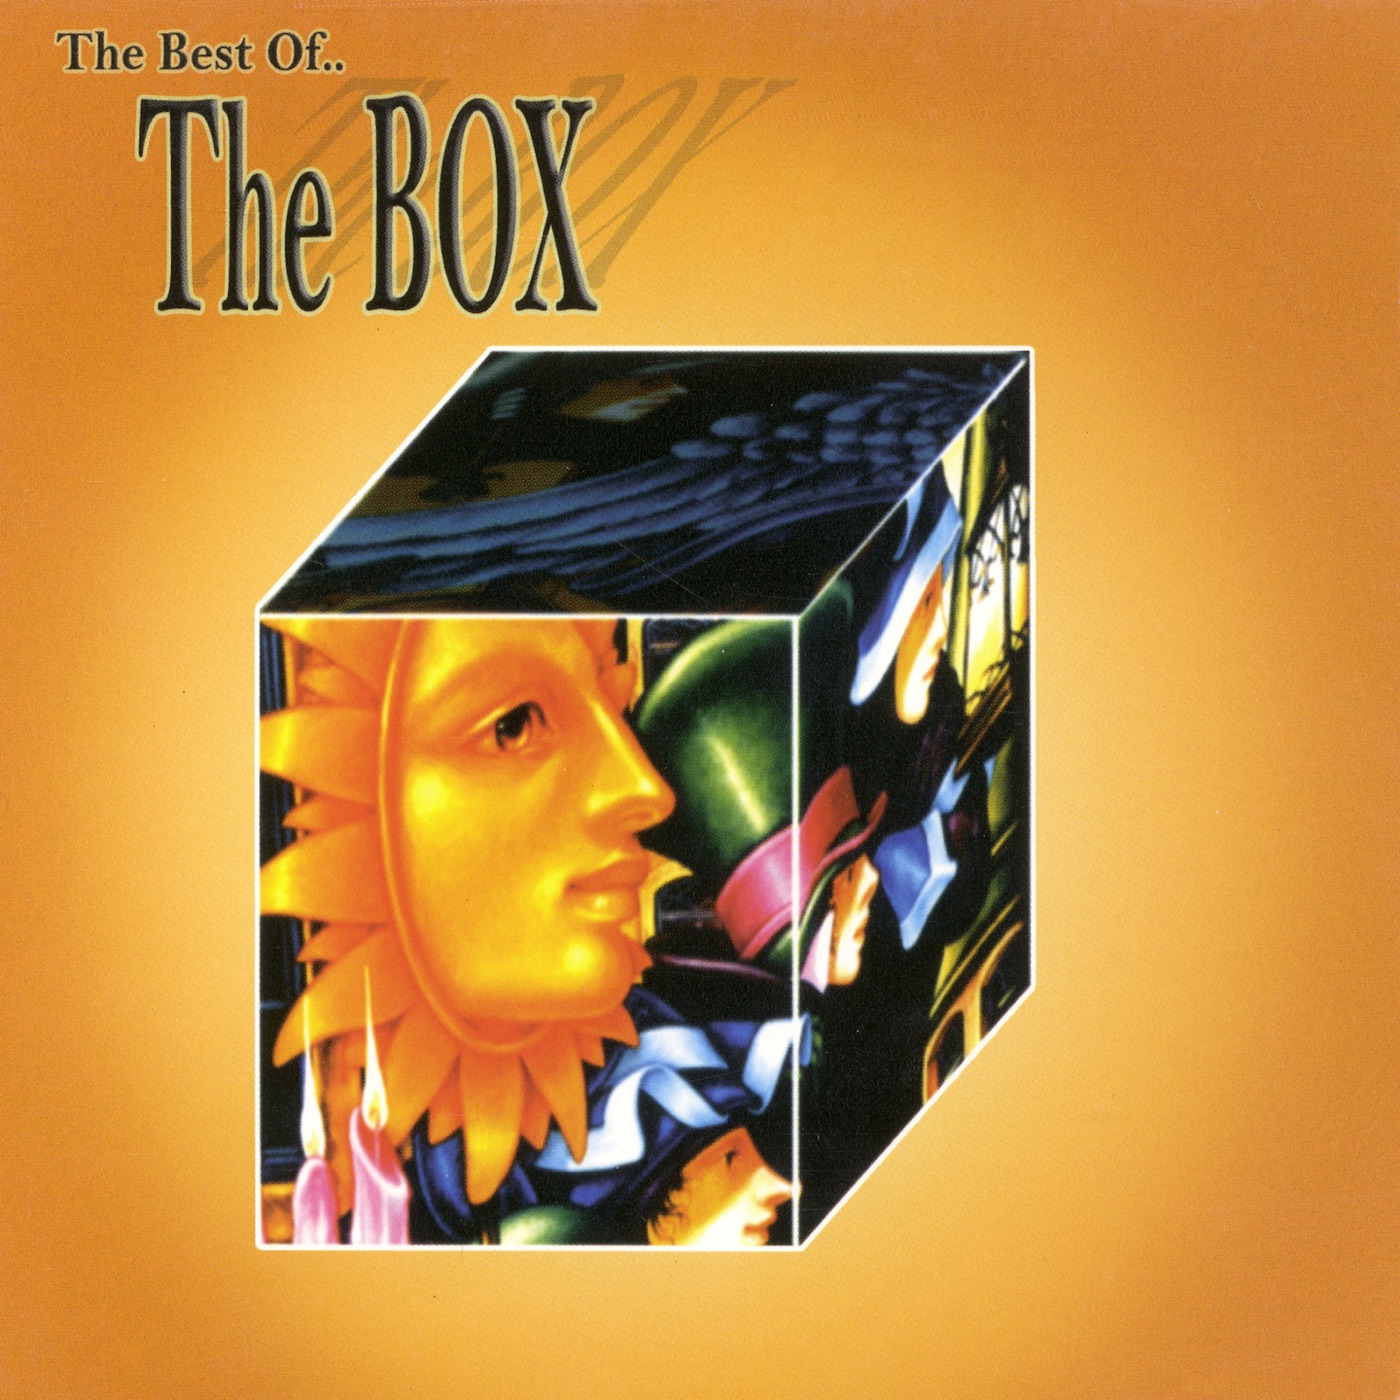 Box, The - Chekmate/Quand le Roy